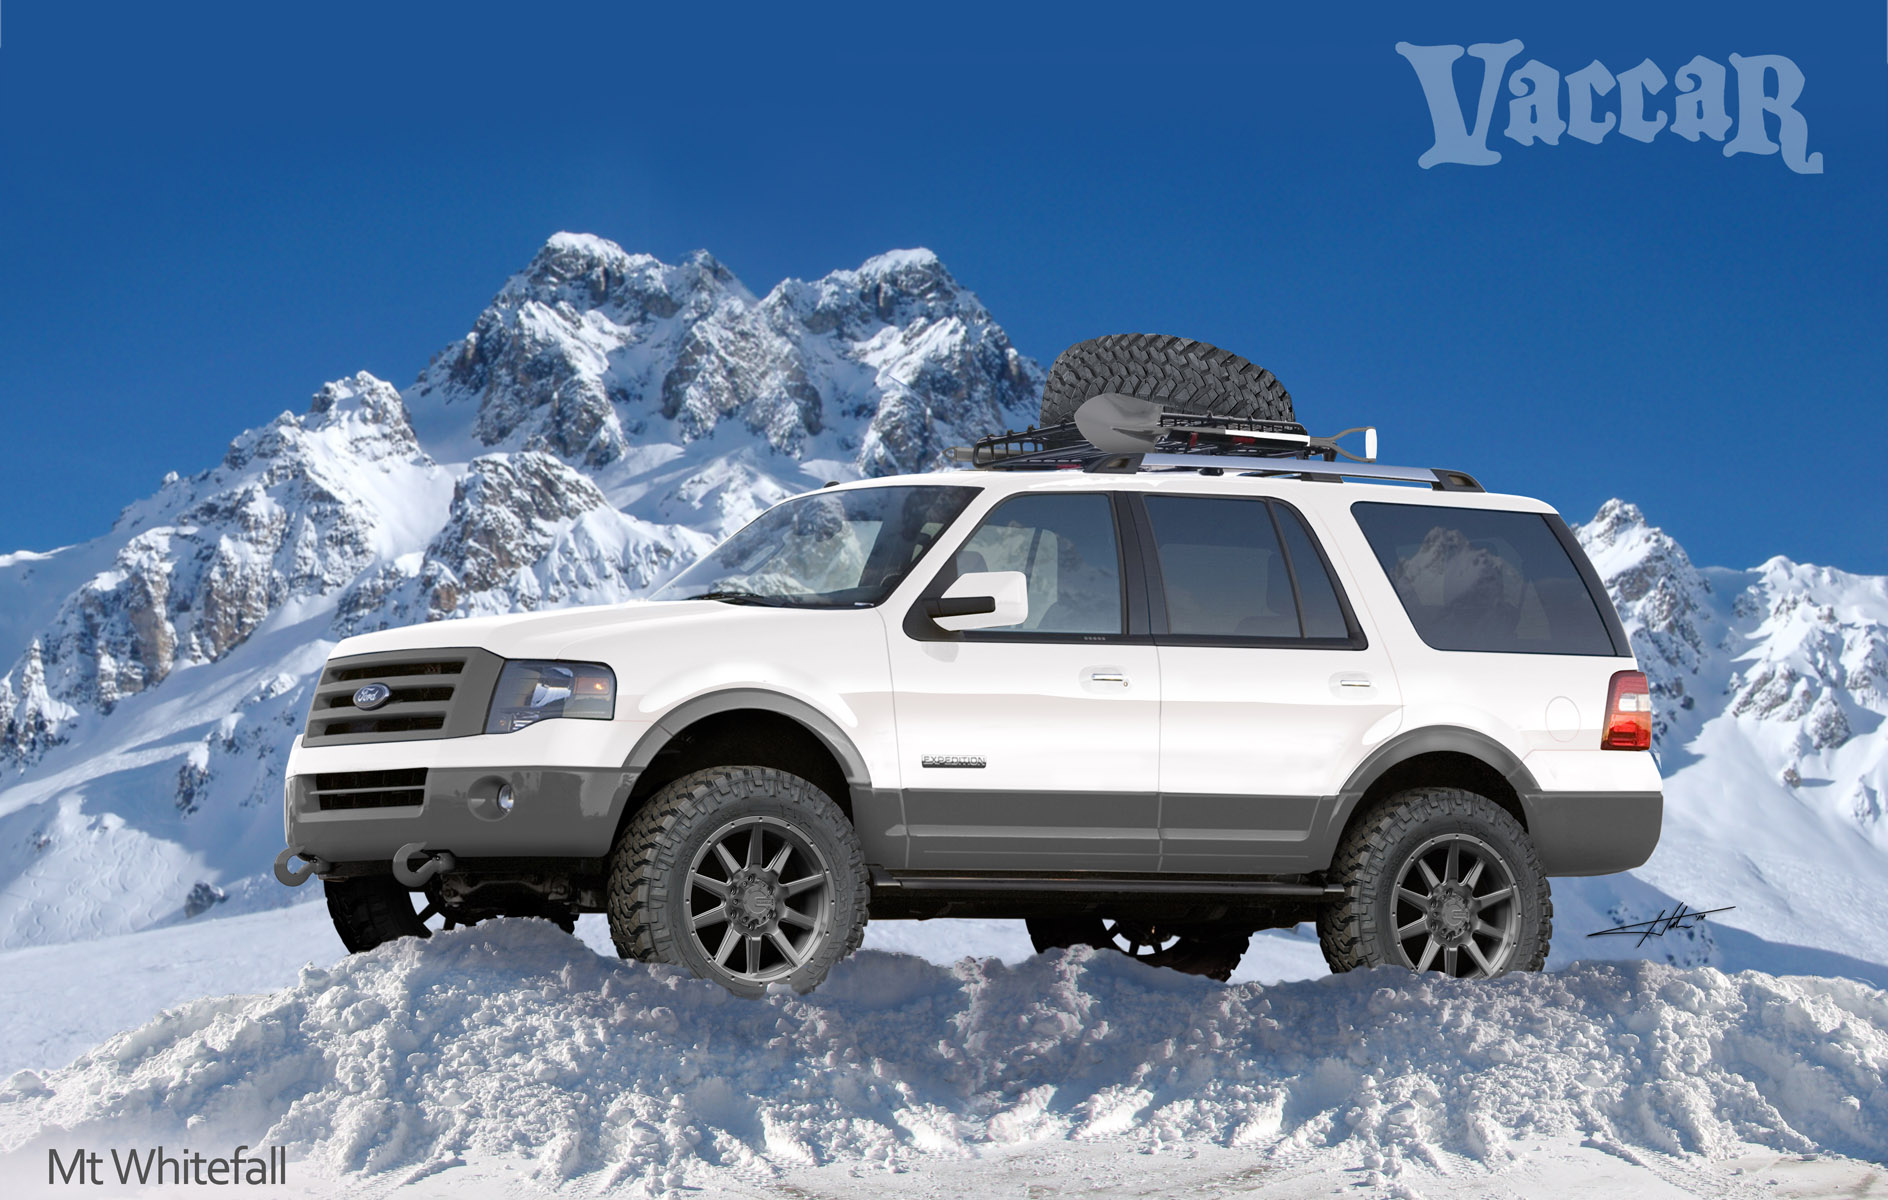 2015 Vaccar Ford Expedition XLT